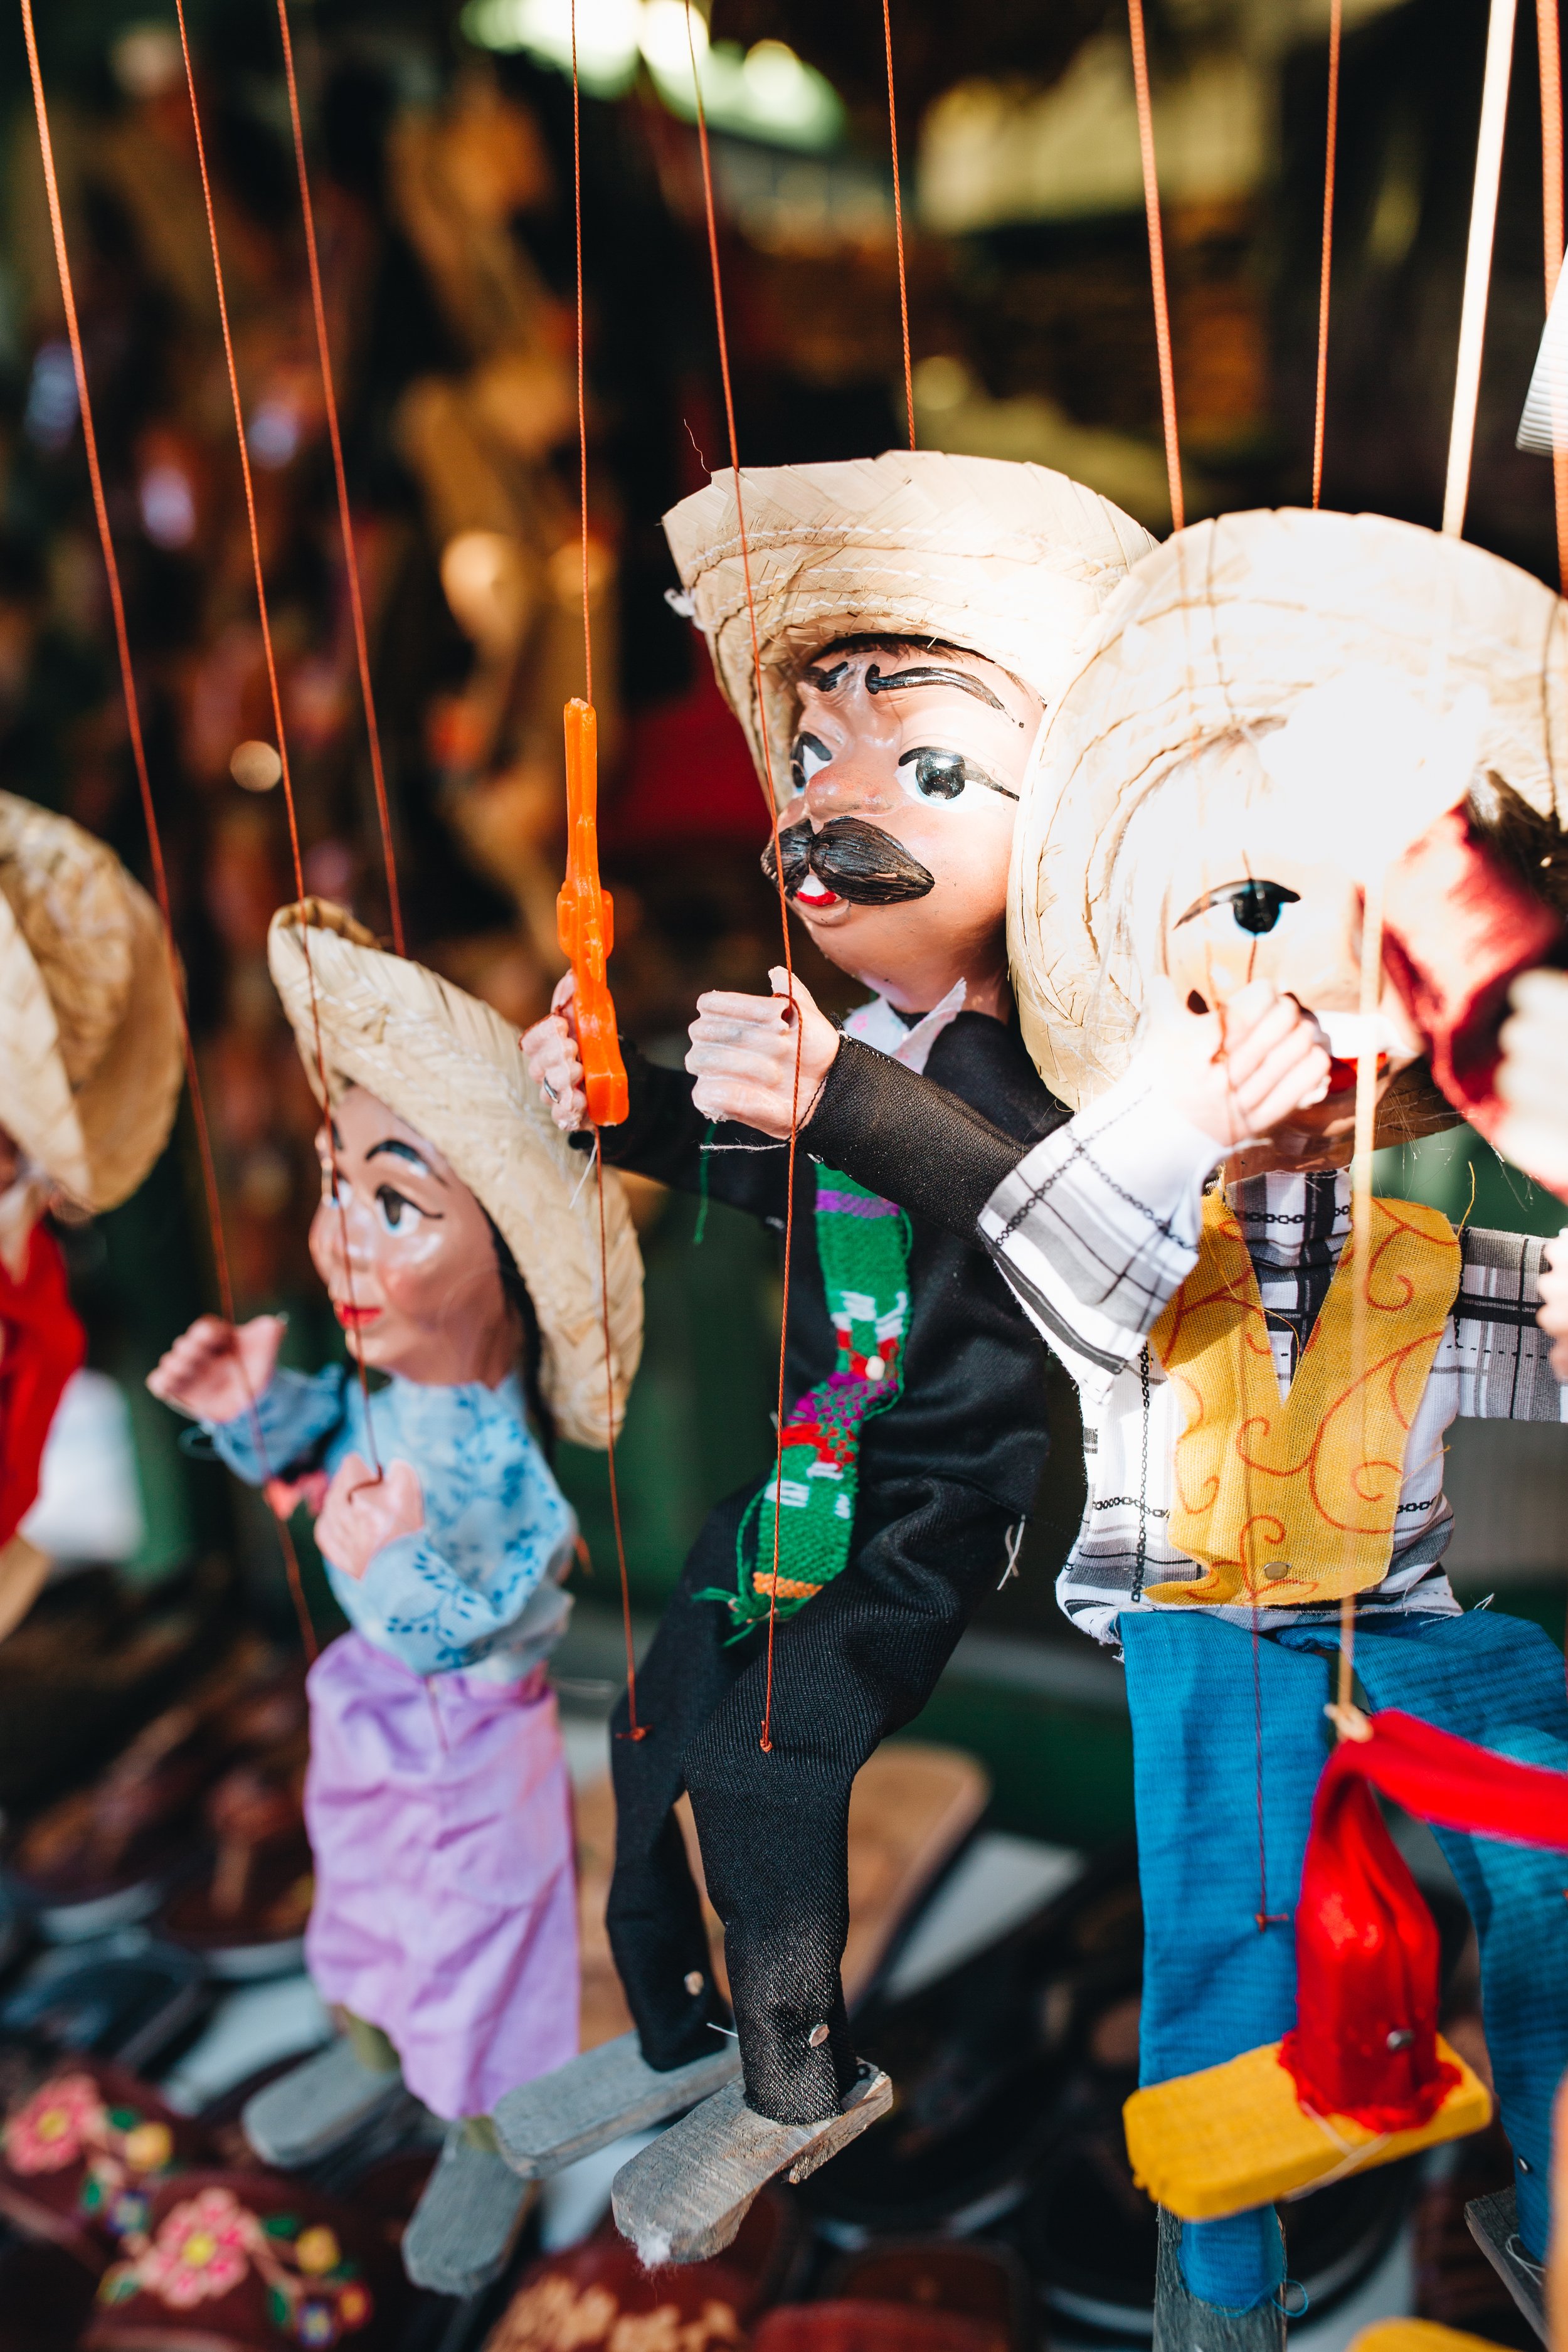 Discover the Lively Mexican Culture of Olvera Street in Downtown L.A.